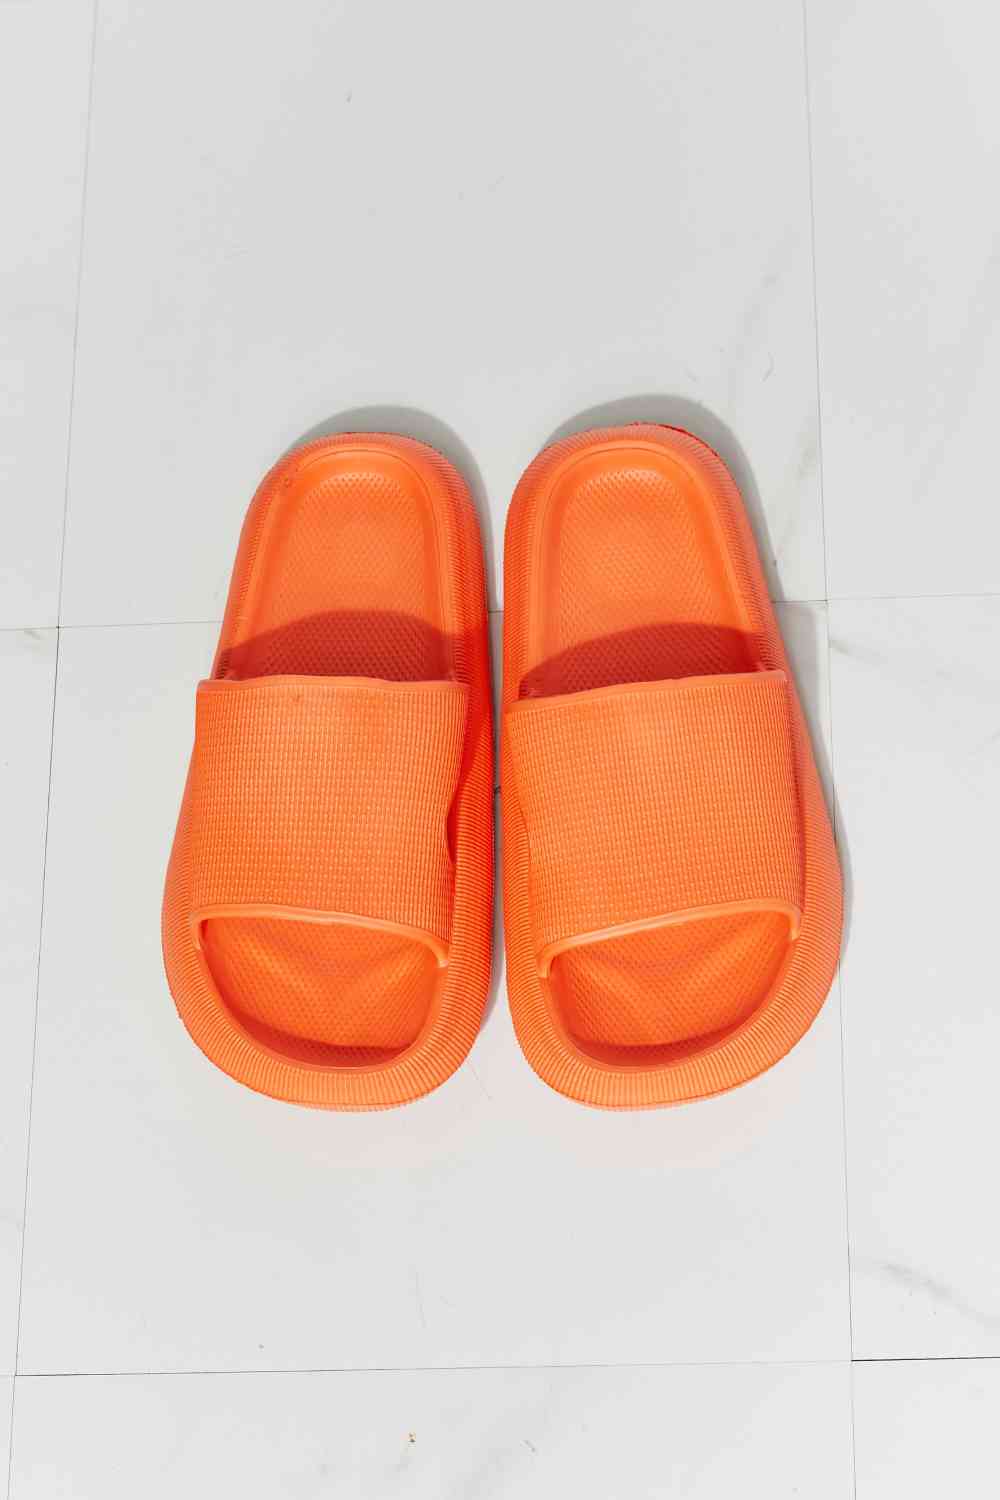 Arms Around Me Open Toe Slide in Orange - Accessories - Shoes - 4 - 2024